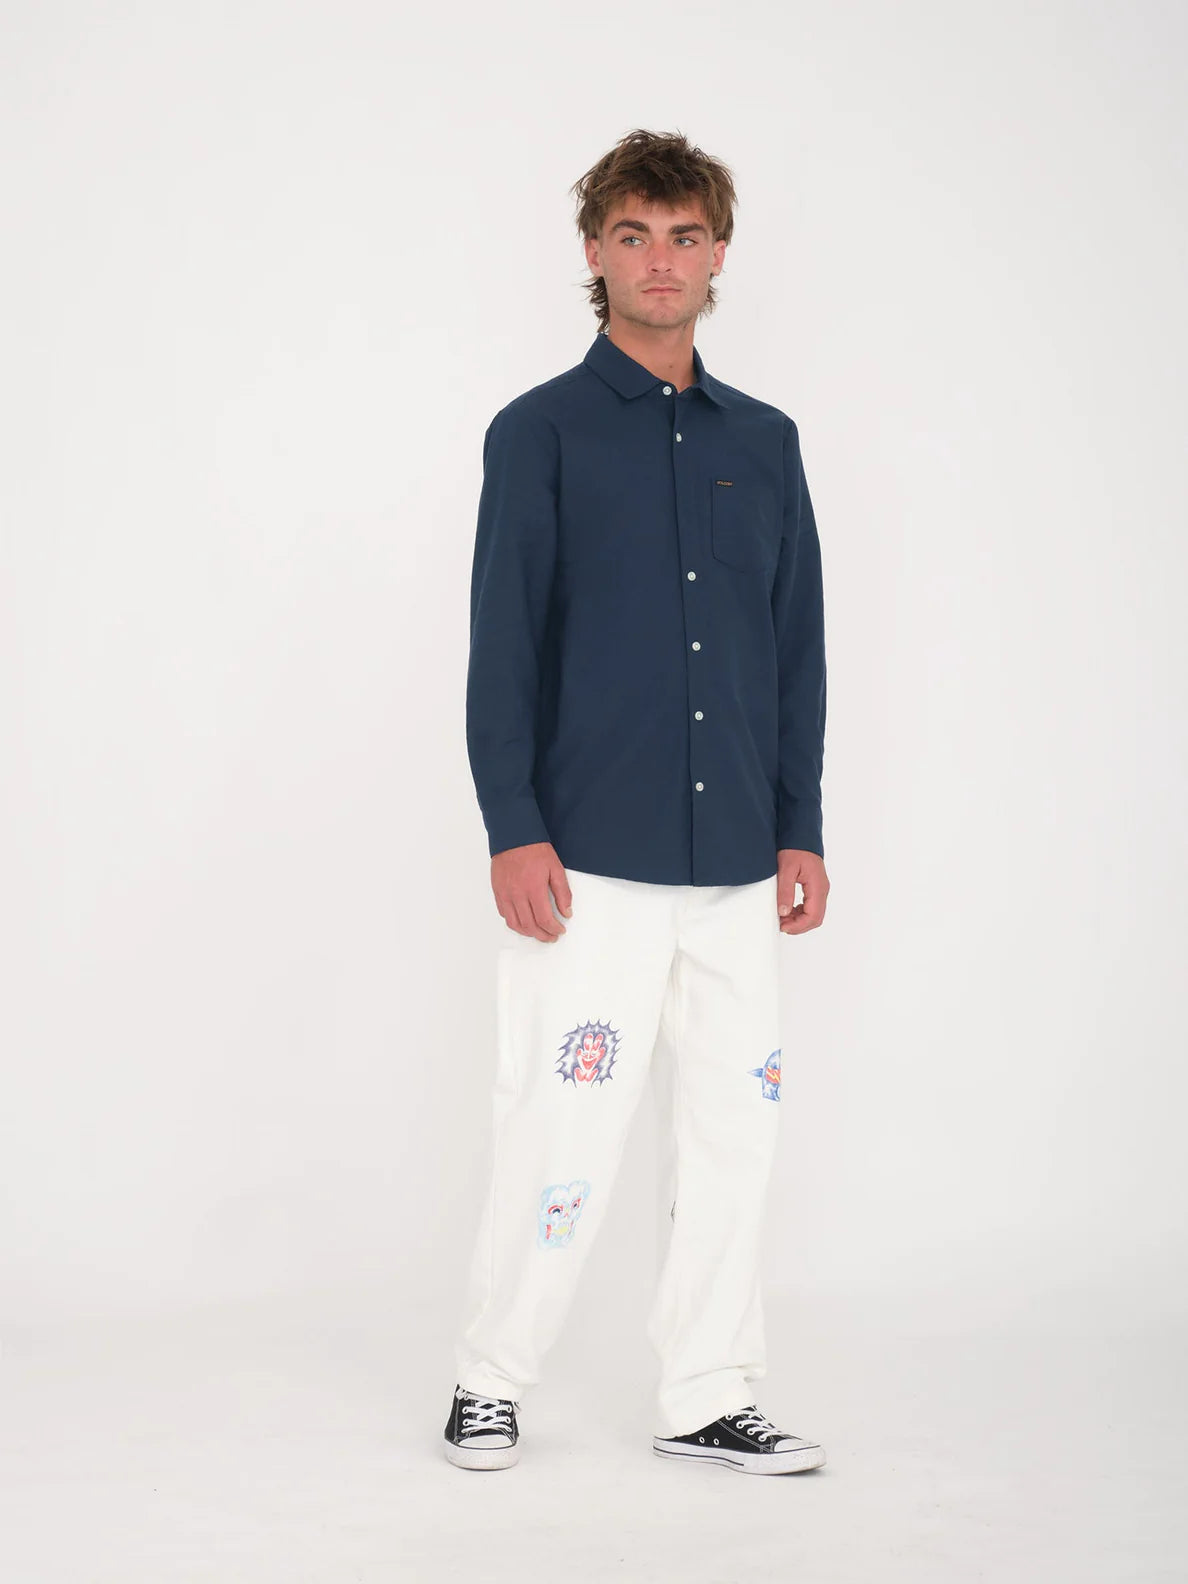 Chemise à manches longues Volcom Veeco Oxford - Navy